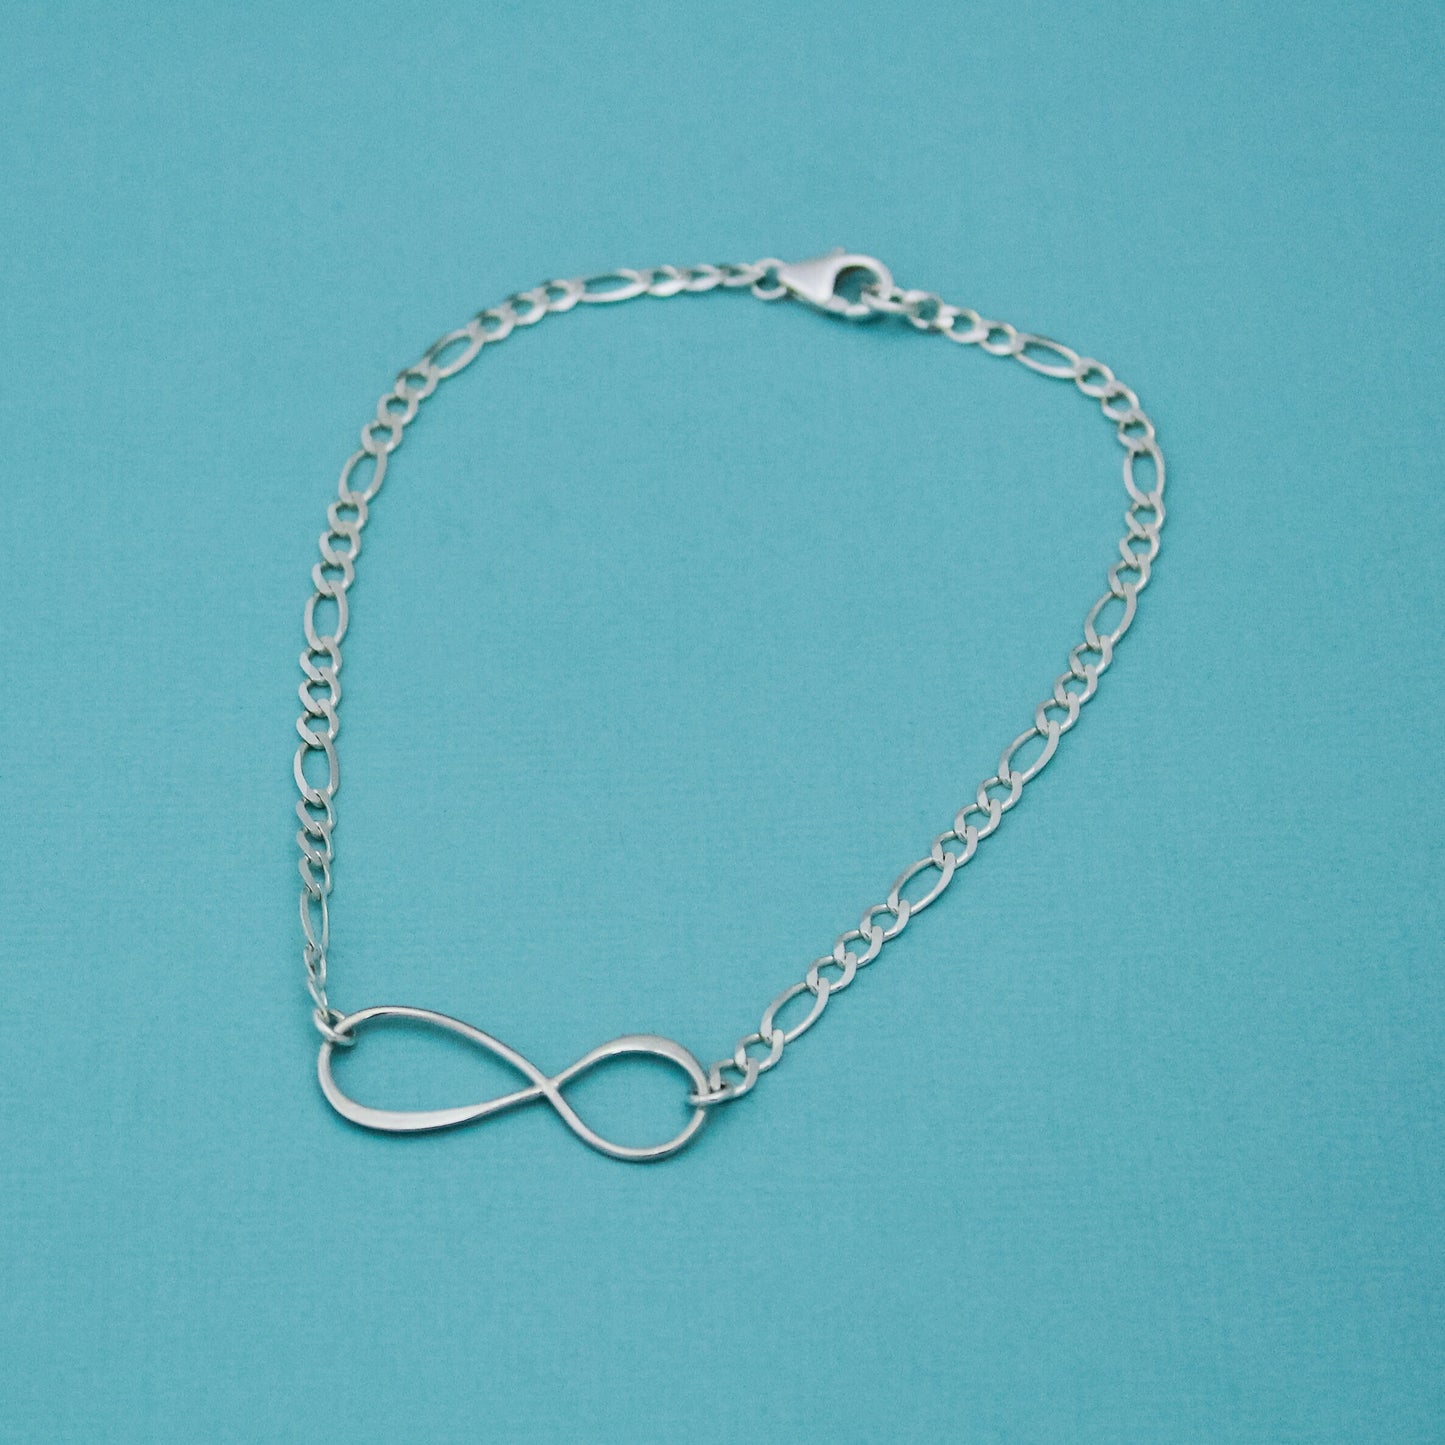 Infinity Anklet, Anniversary Gift, Love you to Infinity, Love Jewelry, Sterling Silver Anklet, Gifts for Her, Summer Cruise Jewelry